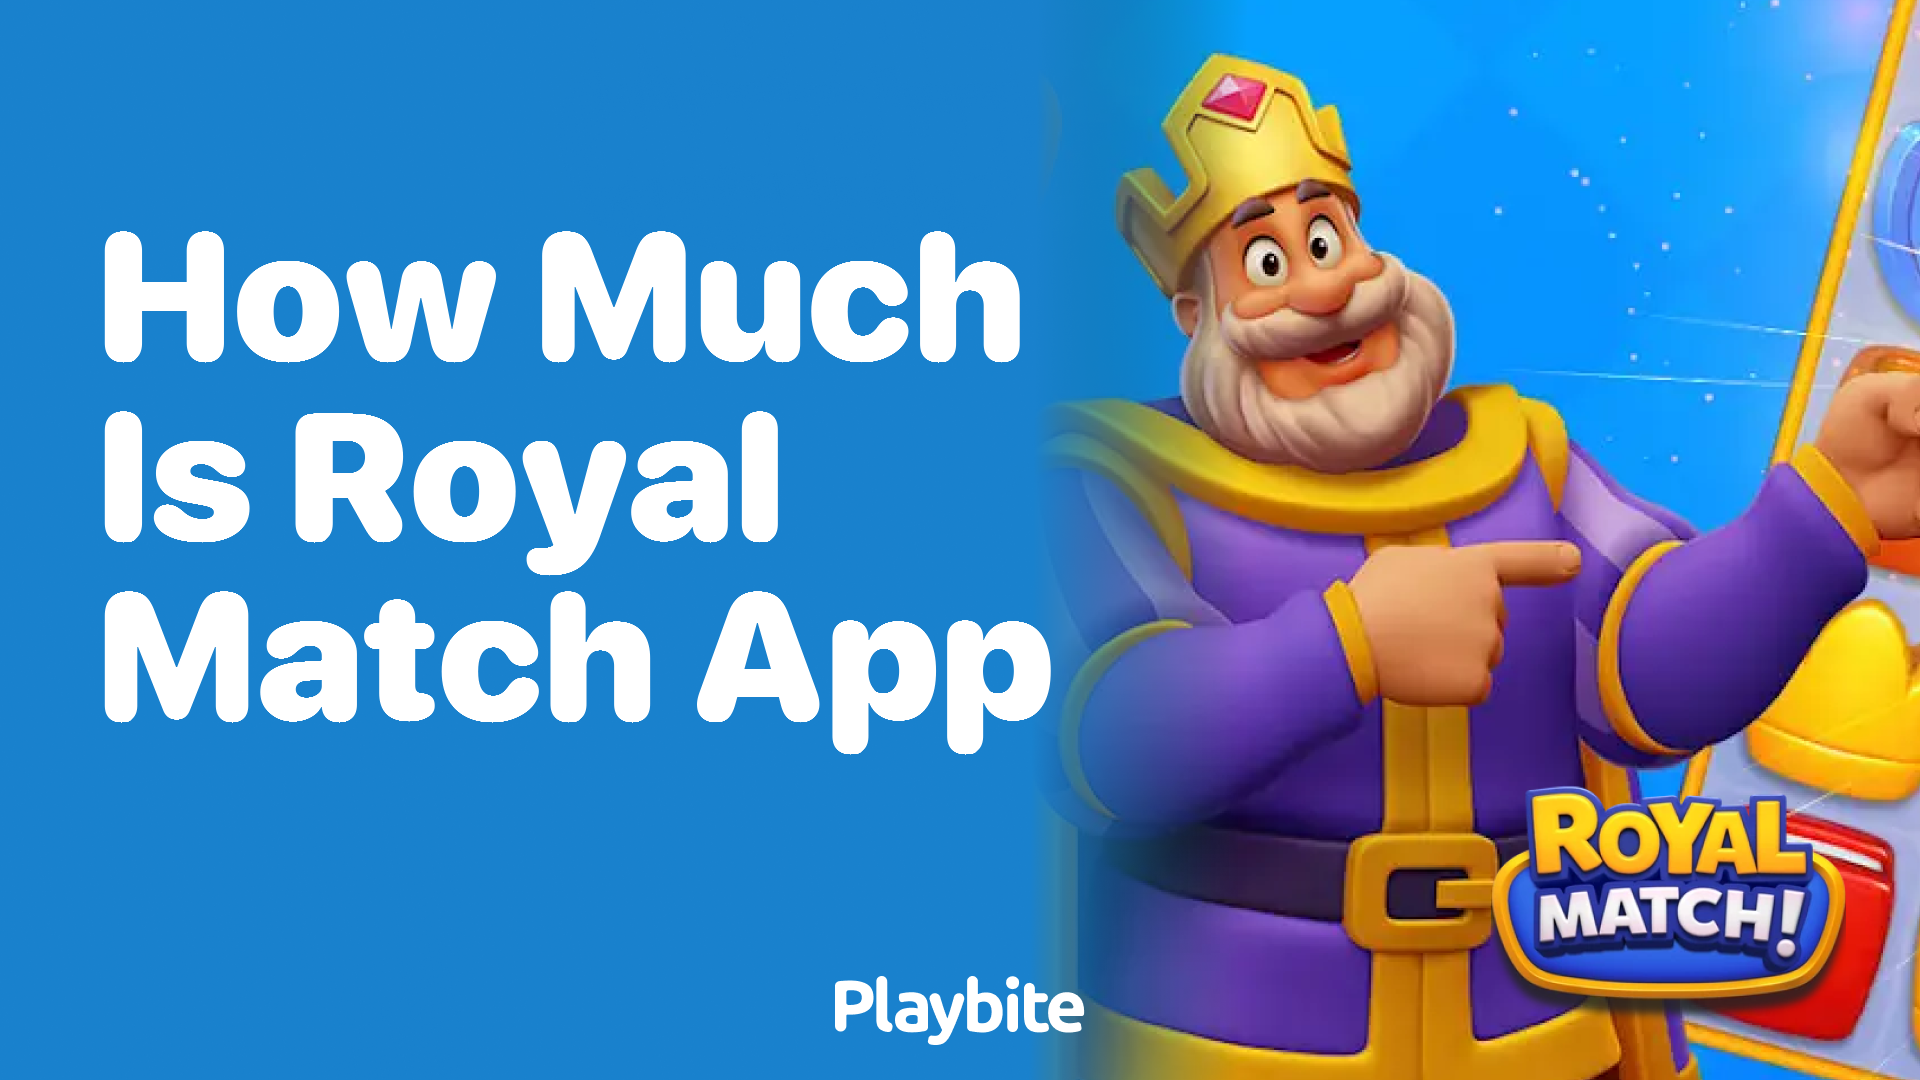 How Much Does the Royal Match App Cost?